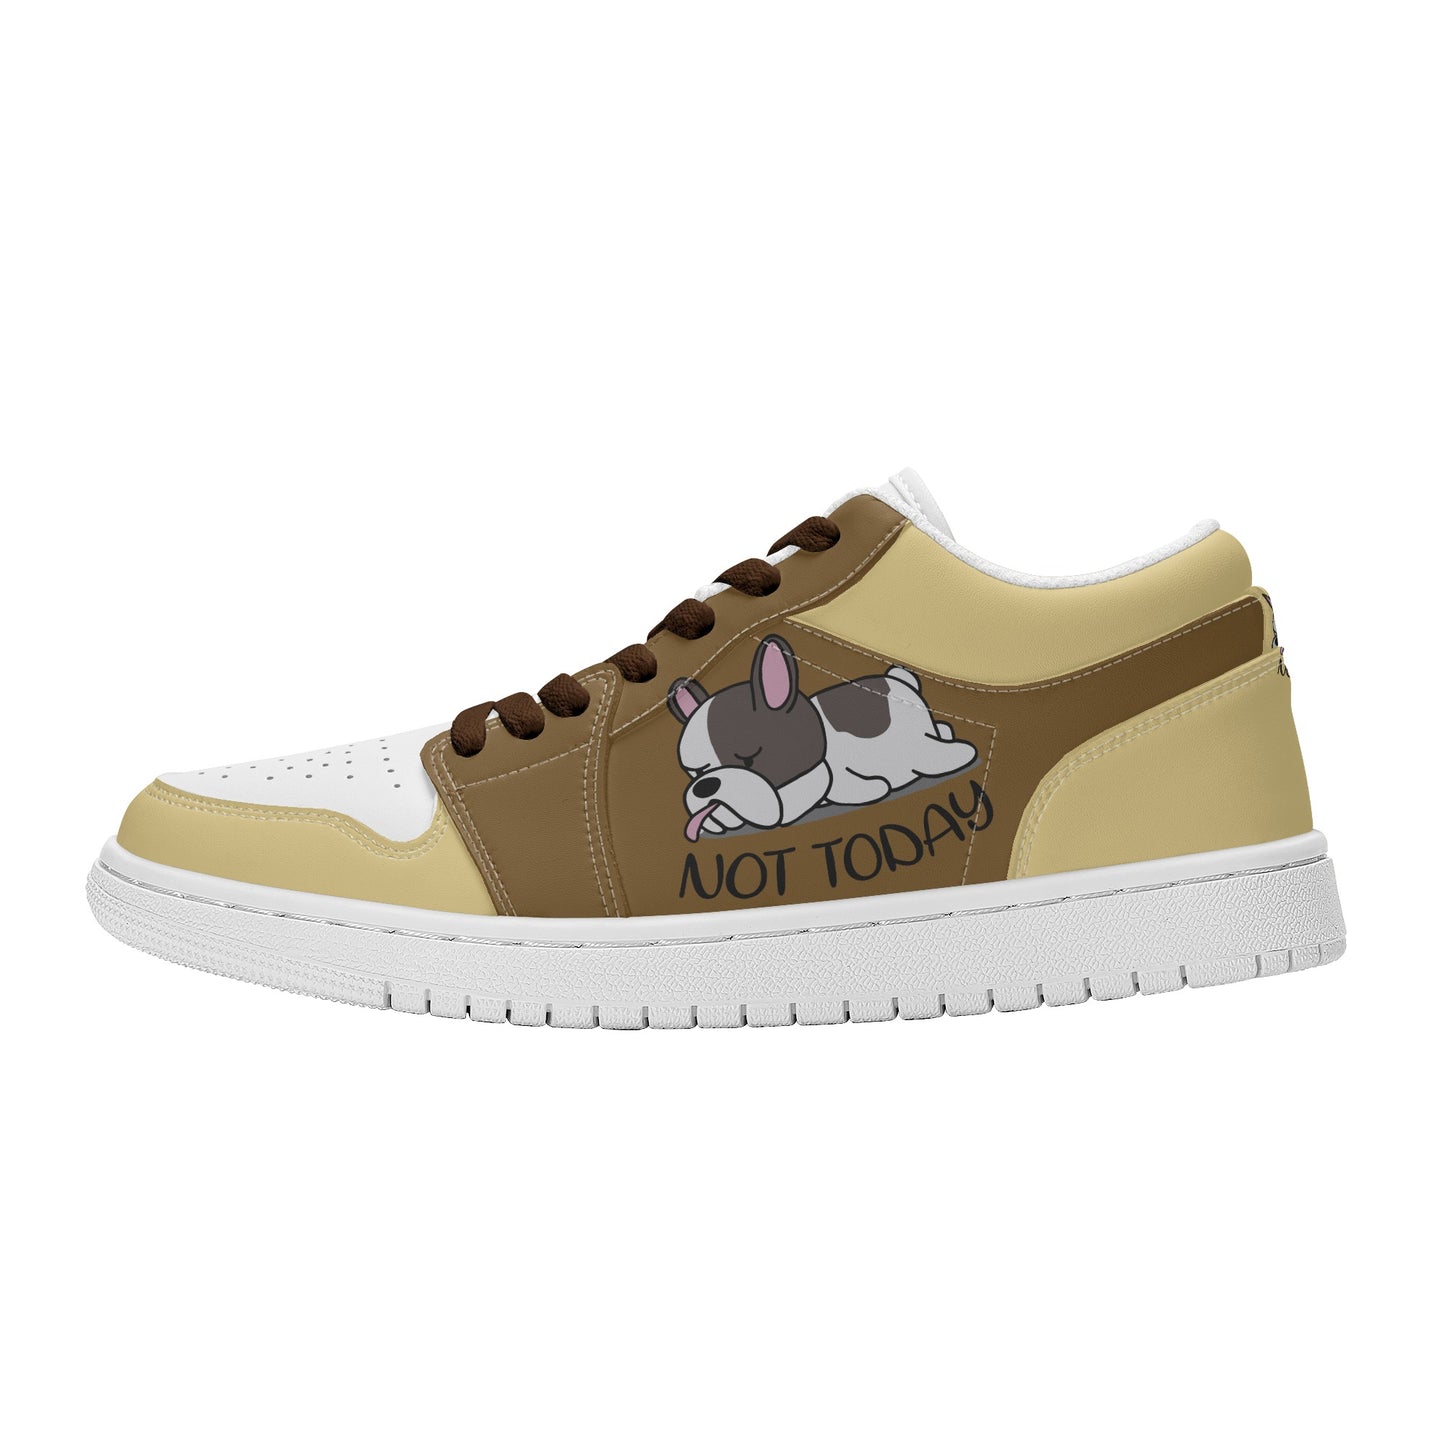 Lazy Frenchie - Low Top Skateboard Sneakers